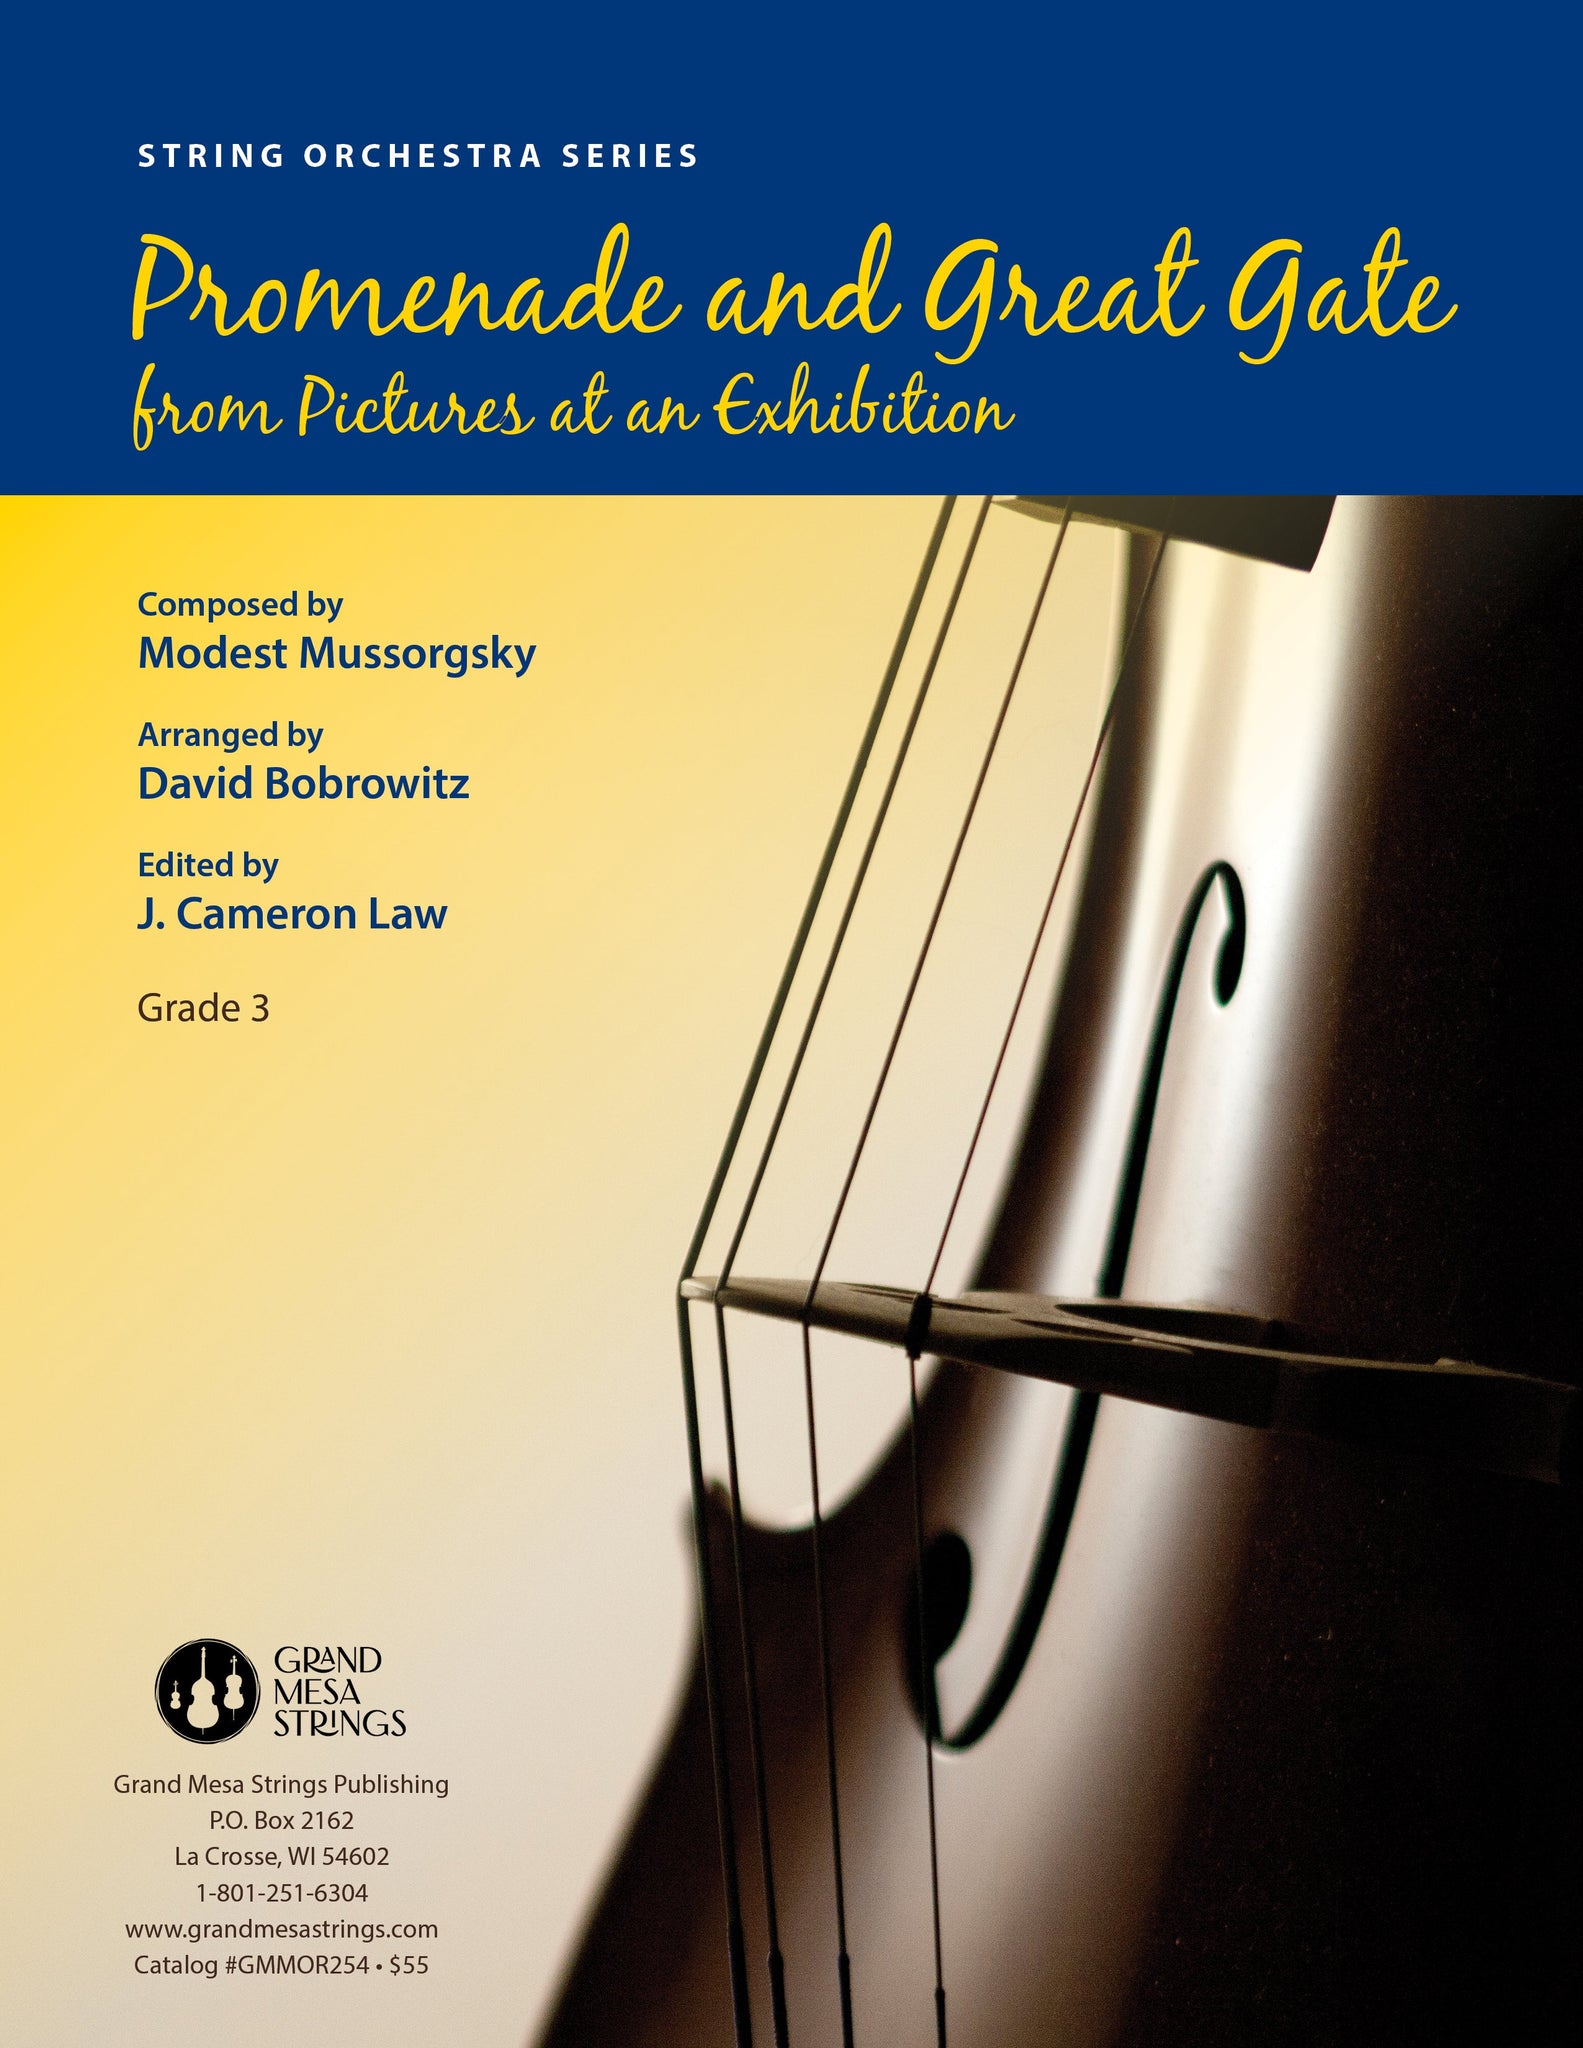 Strings sheet music cover of Promenade and Great Gate from Pictures at an Exhibition, composed by Modest Mussorgsky, arranged by David Bobrowitz.